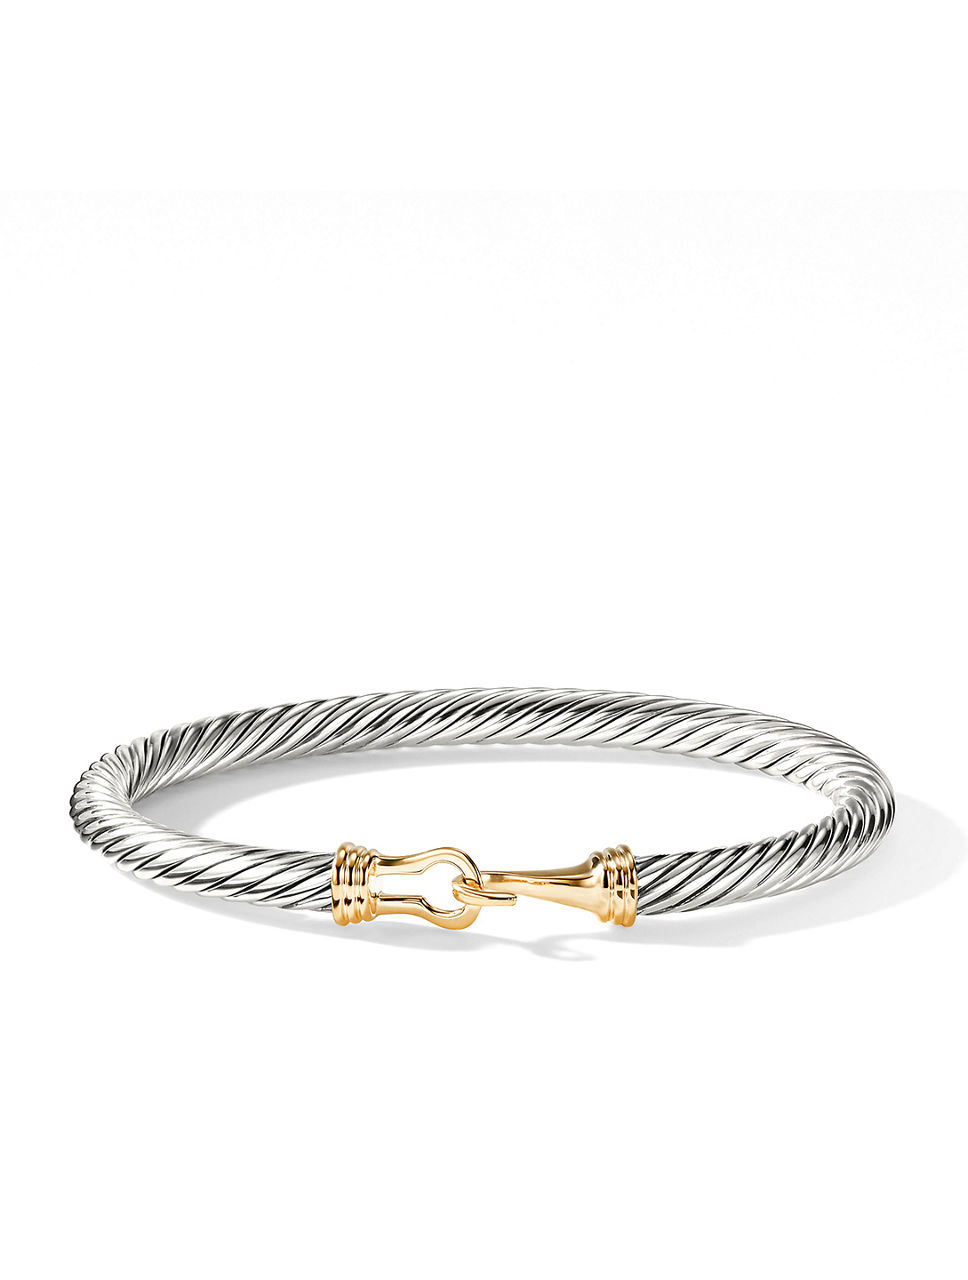 Buckle Classic Cable Bracelet Sterling Silver With 14k Yellow Gold, 5mm